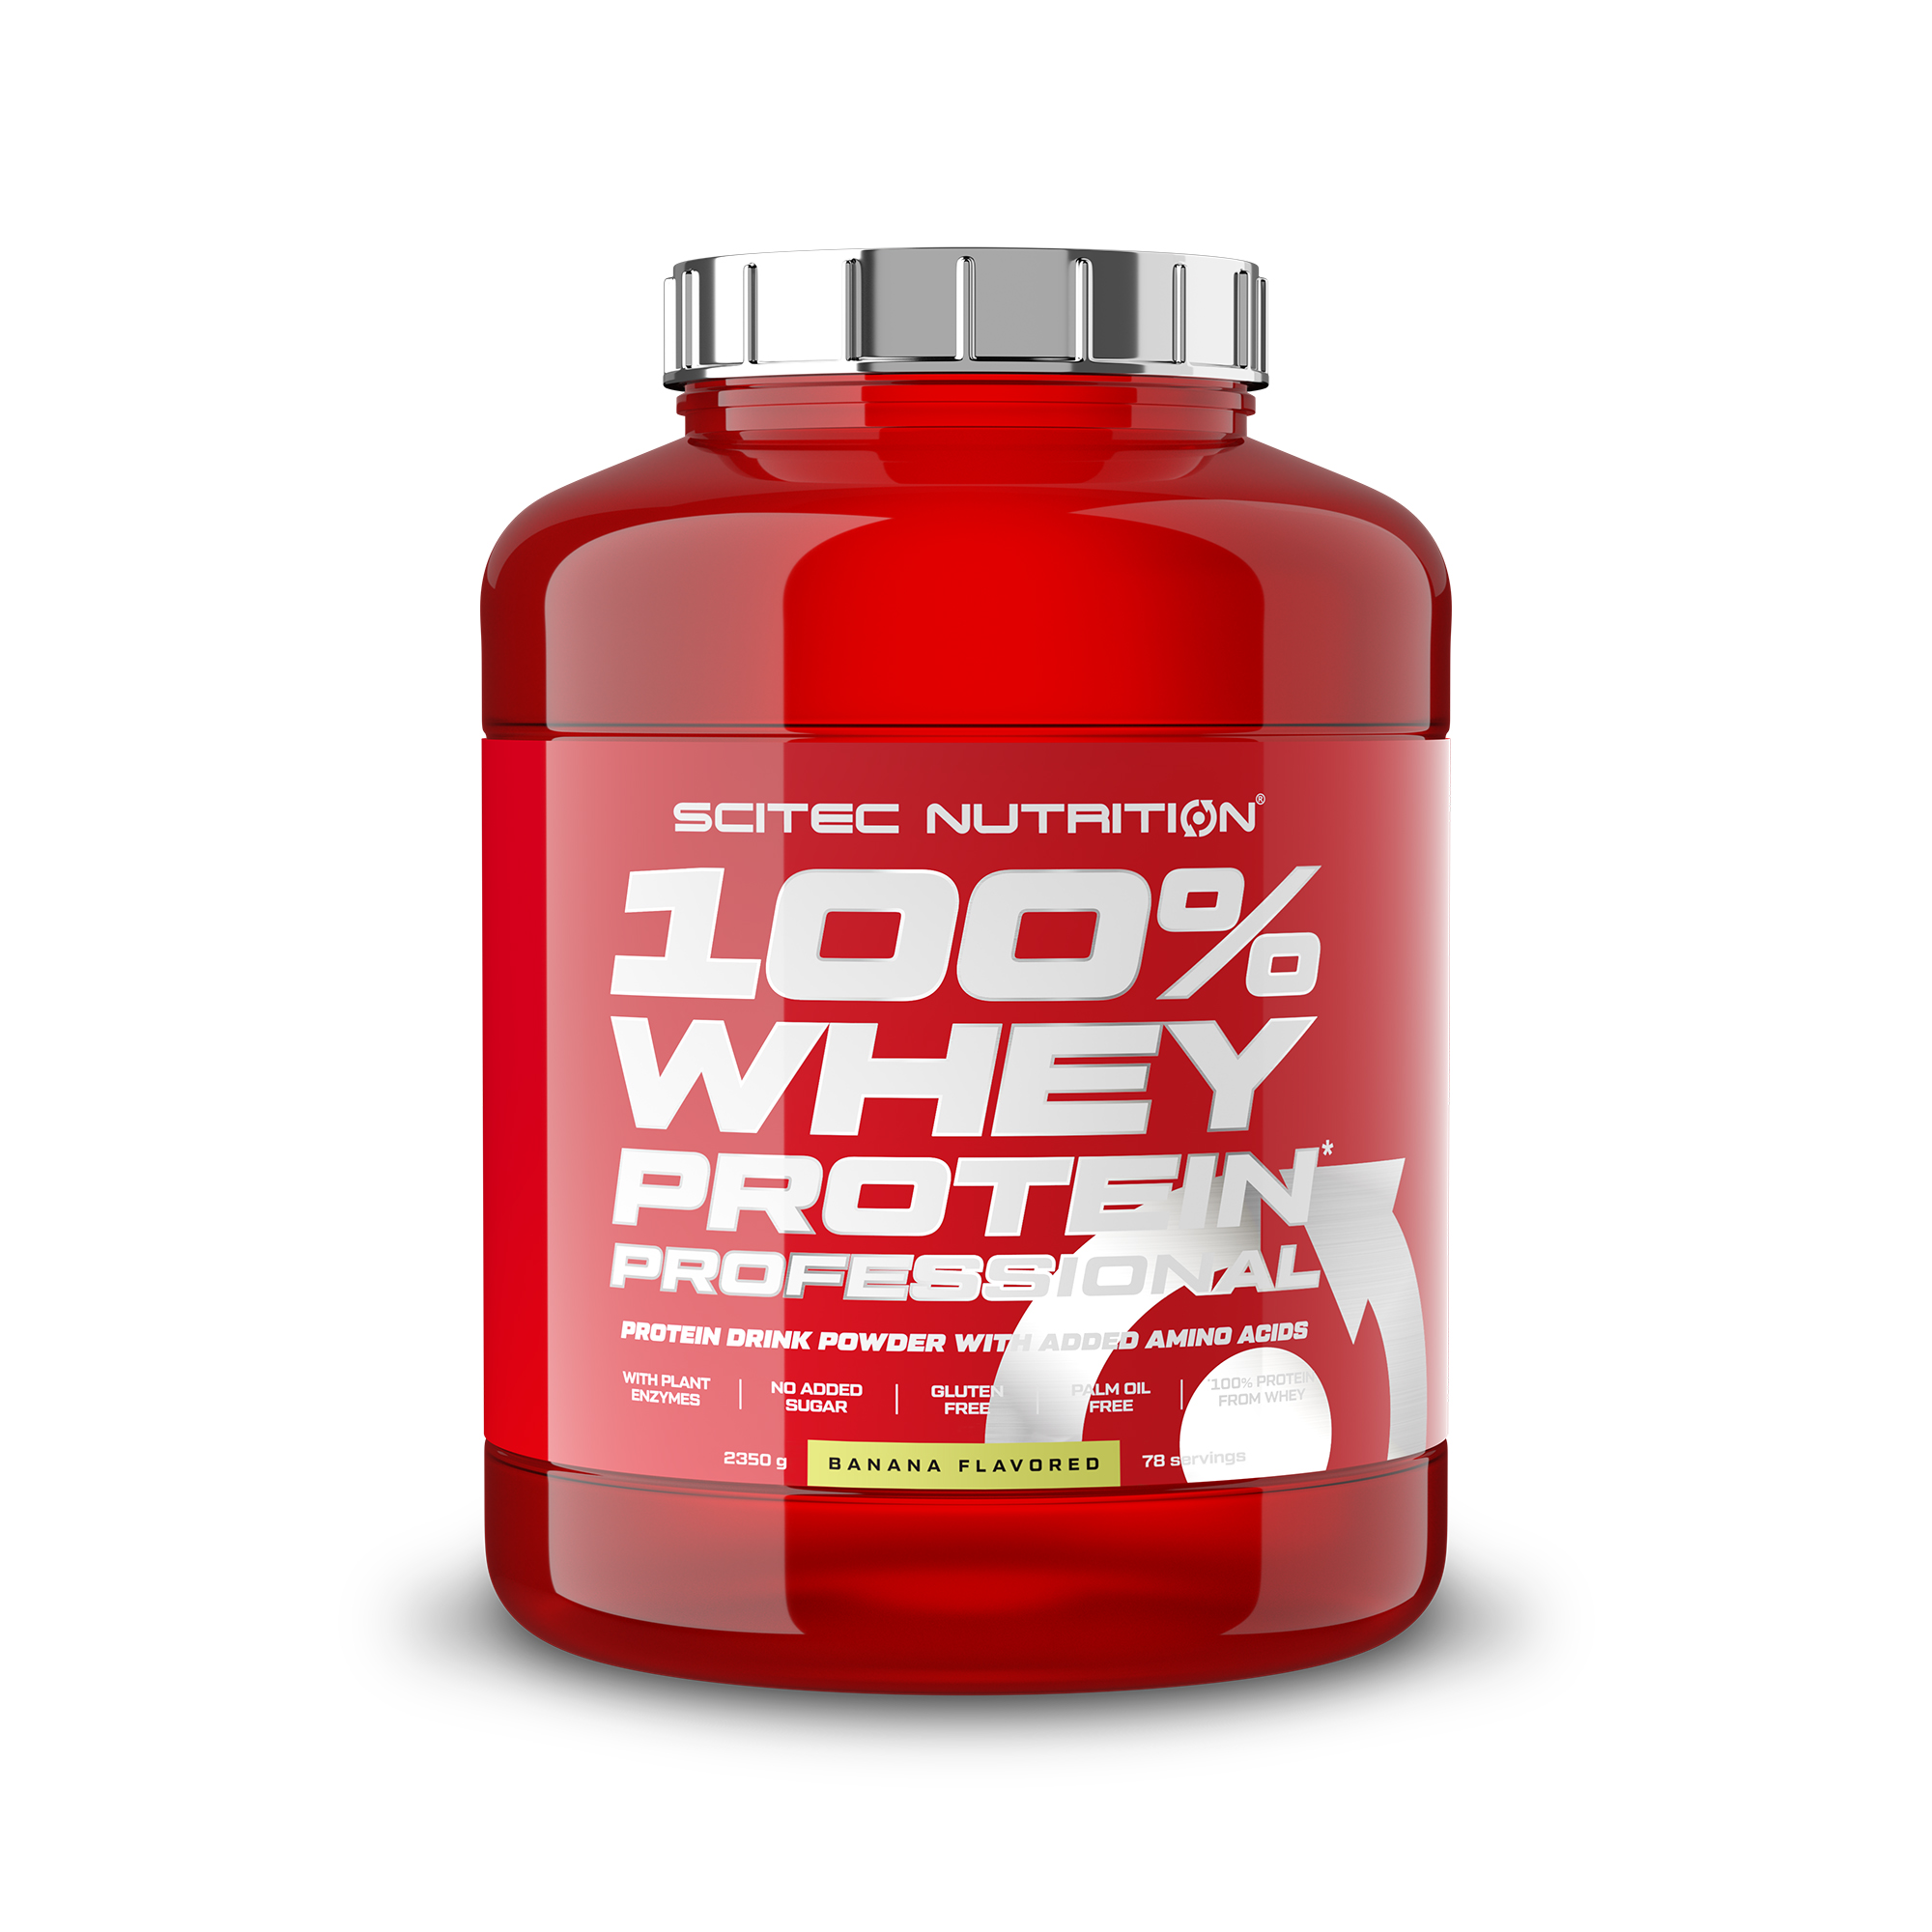 Scitec nutrition 100. Scitec Nutrition Whey Protein. Протеин Scitec Nutrition 100 Whey. Scitec Nutrition 100 Whey Protein professional. Scitec Nutrition протеин 100 Whey isolate 5 kg.